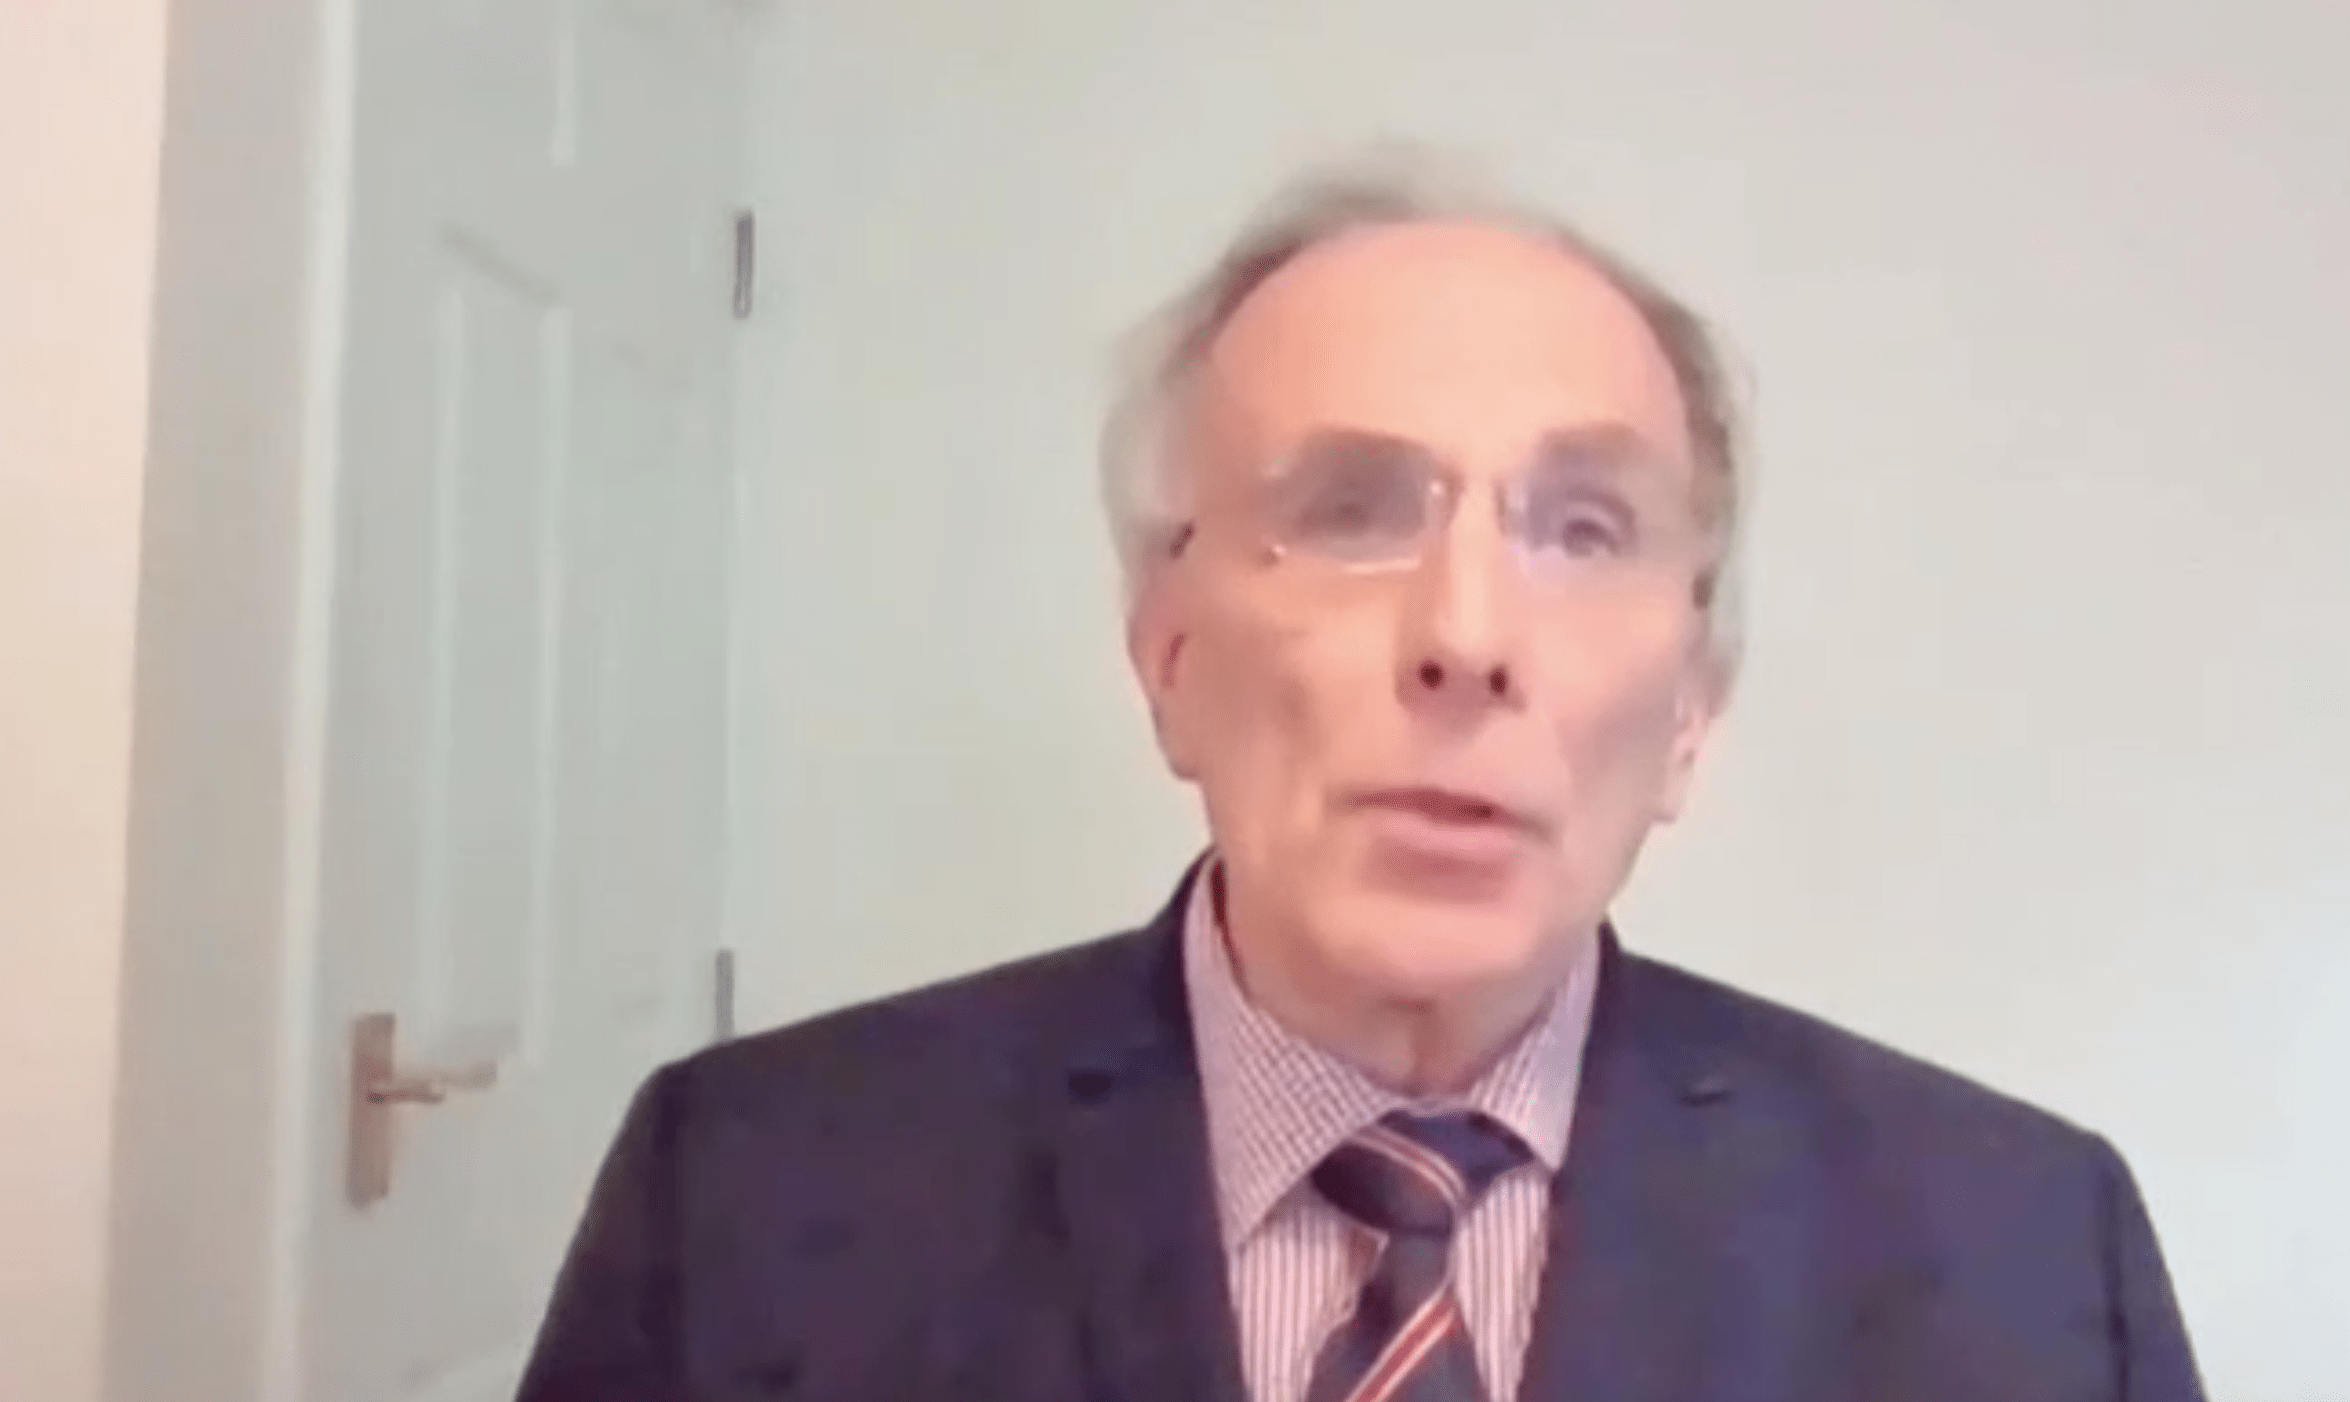 Peter Bone MP: “This is not how our parliamentary democracy works”